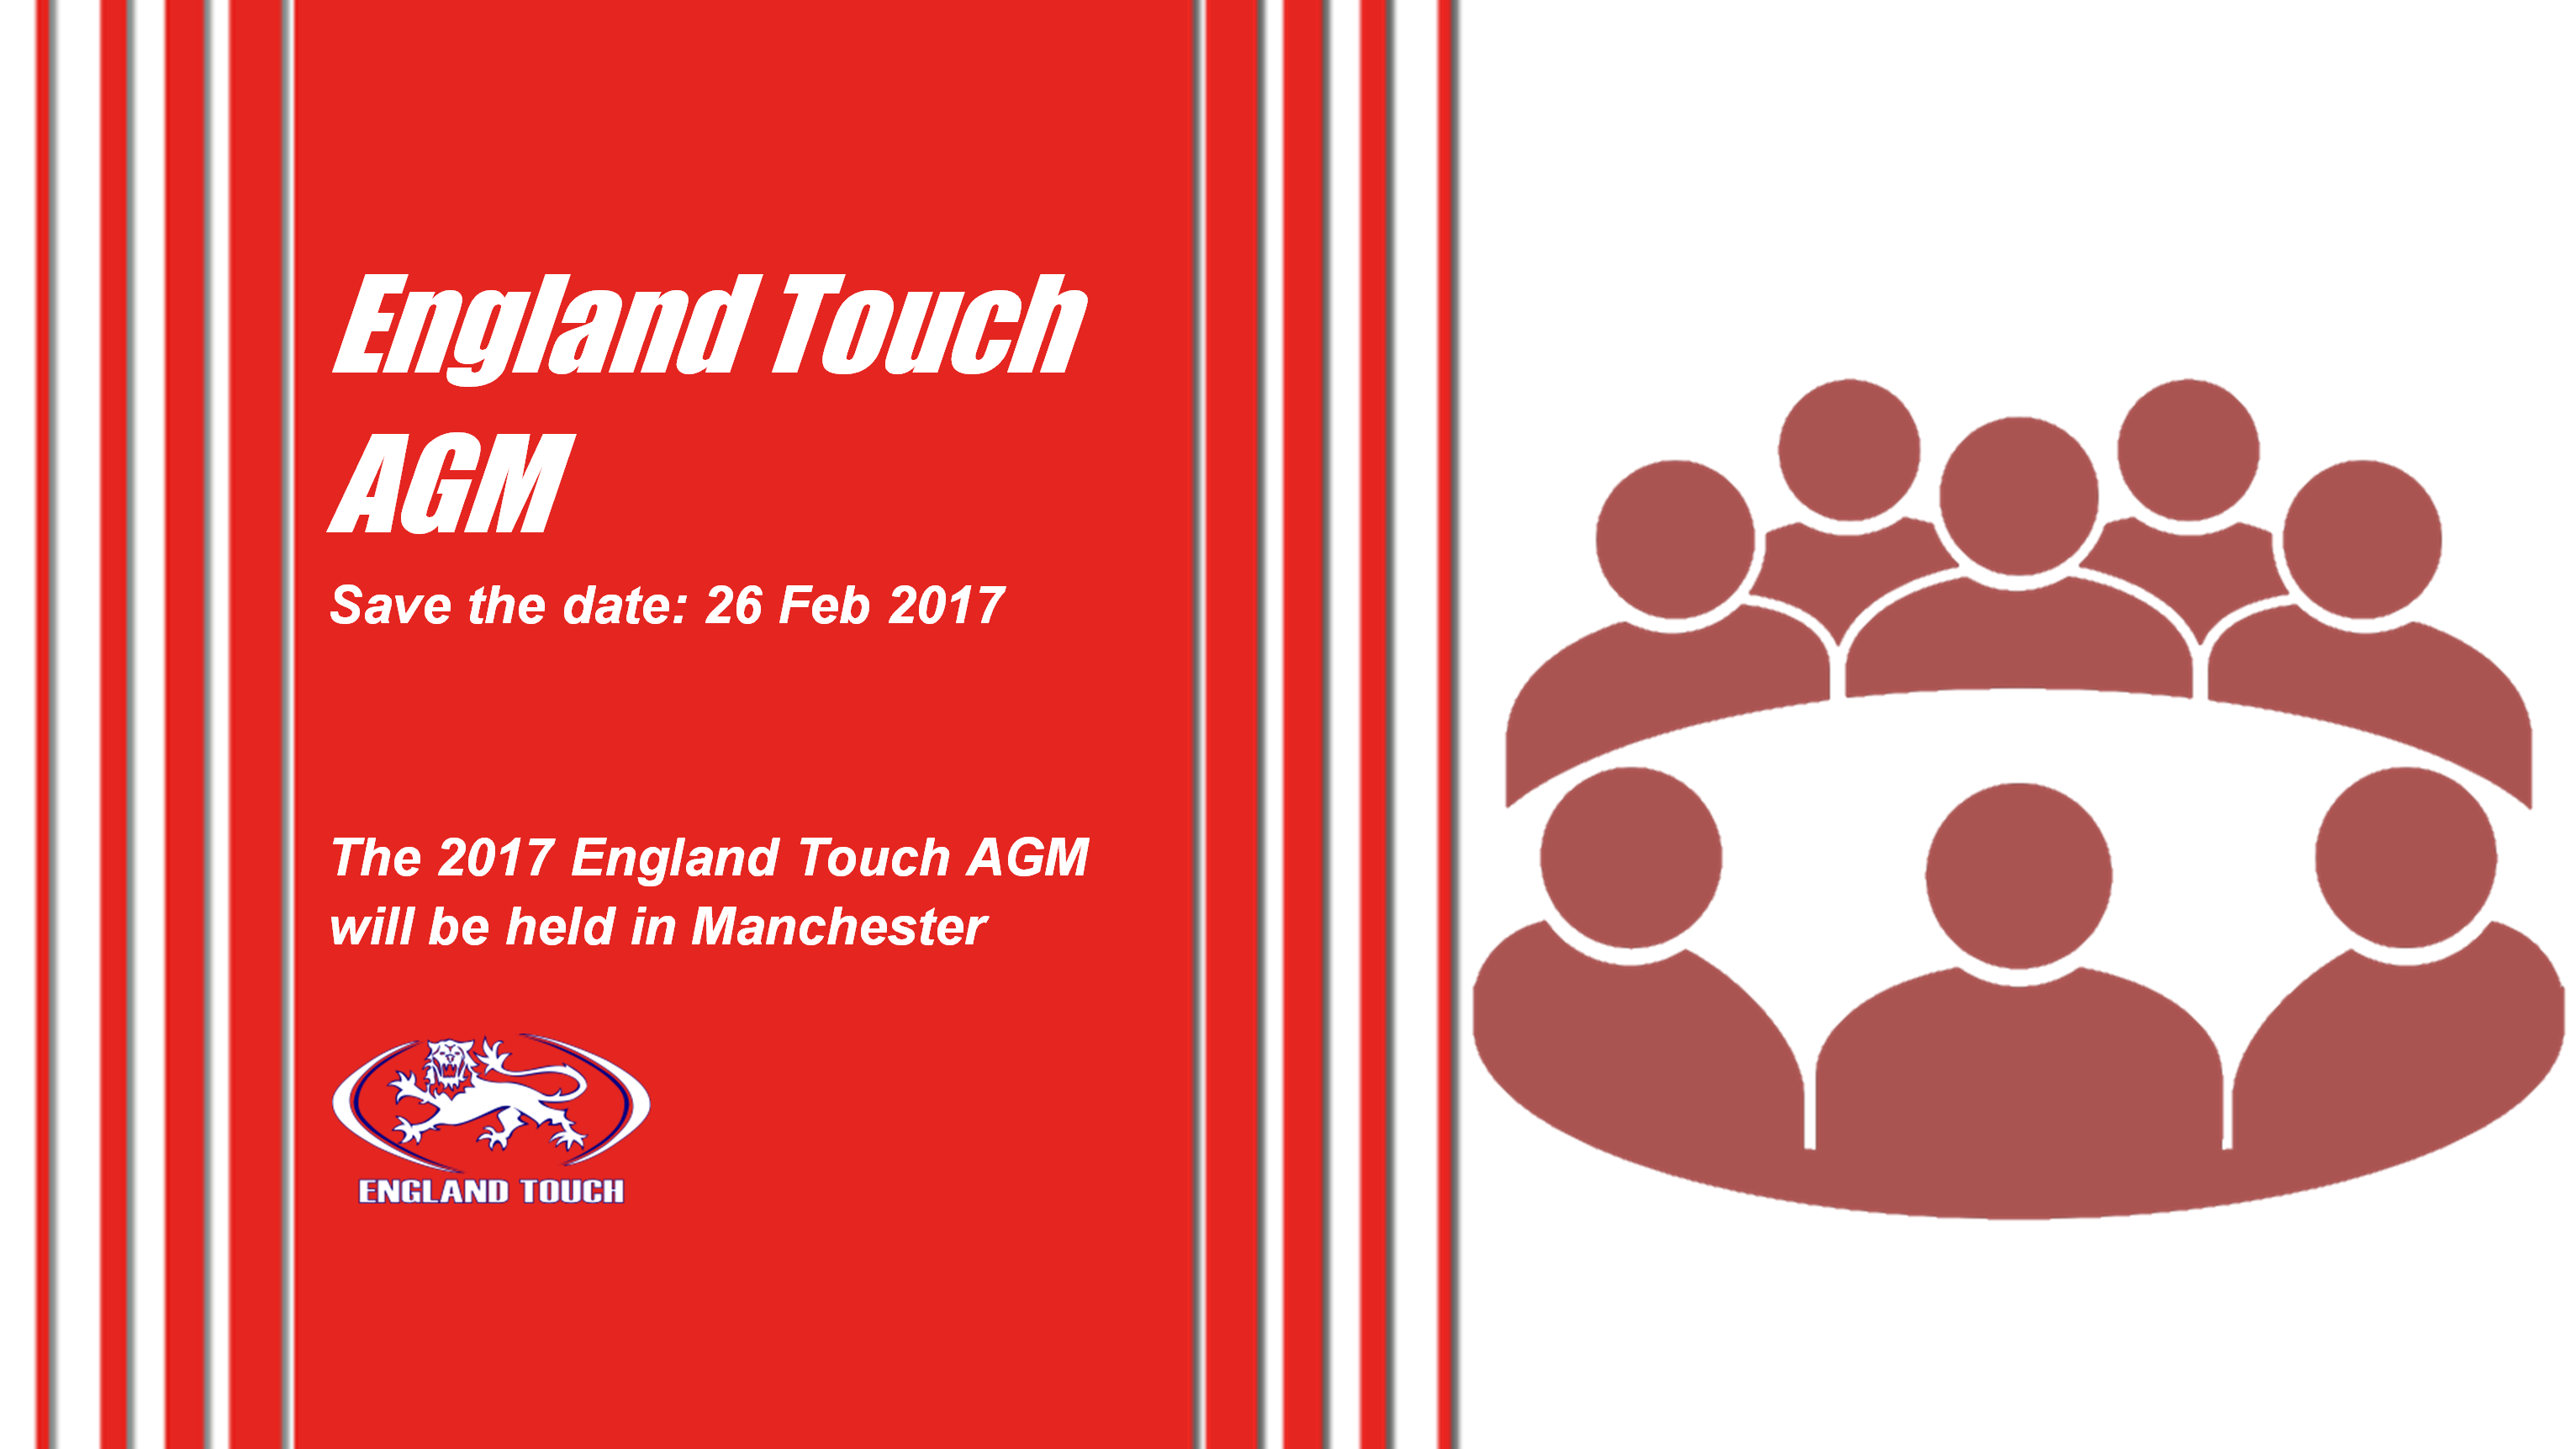 England Touch AGM - Save the date: 26 Feb 2017